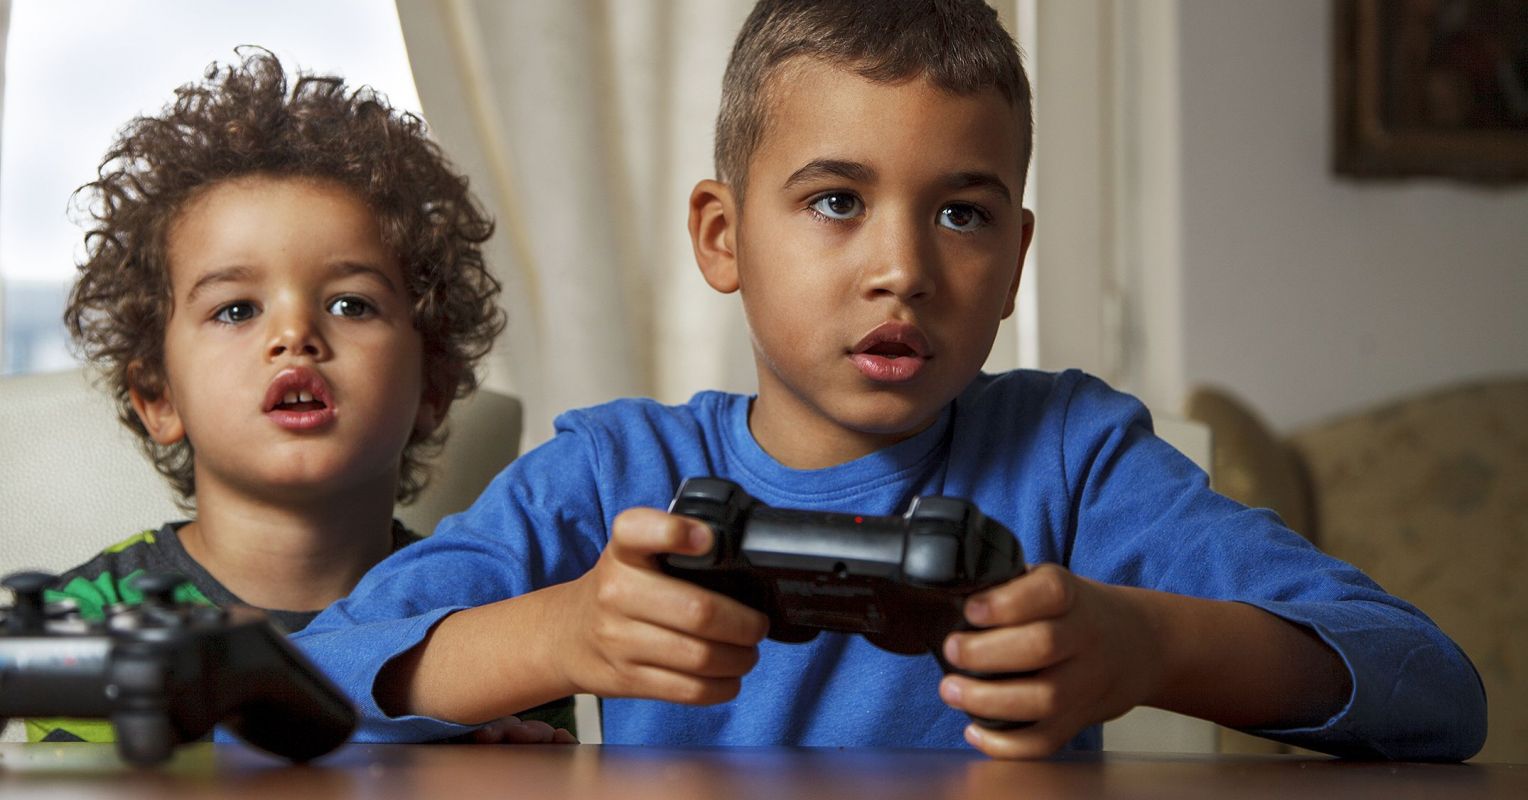 5 Hard to Believe Facts About Video Gaming in 2019